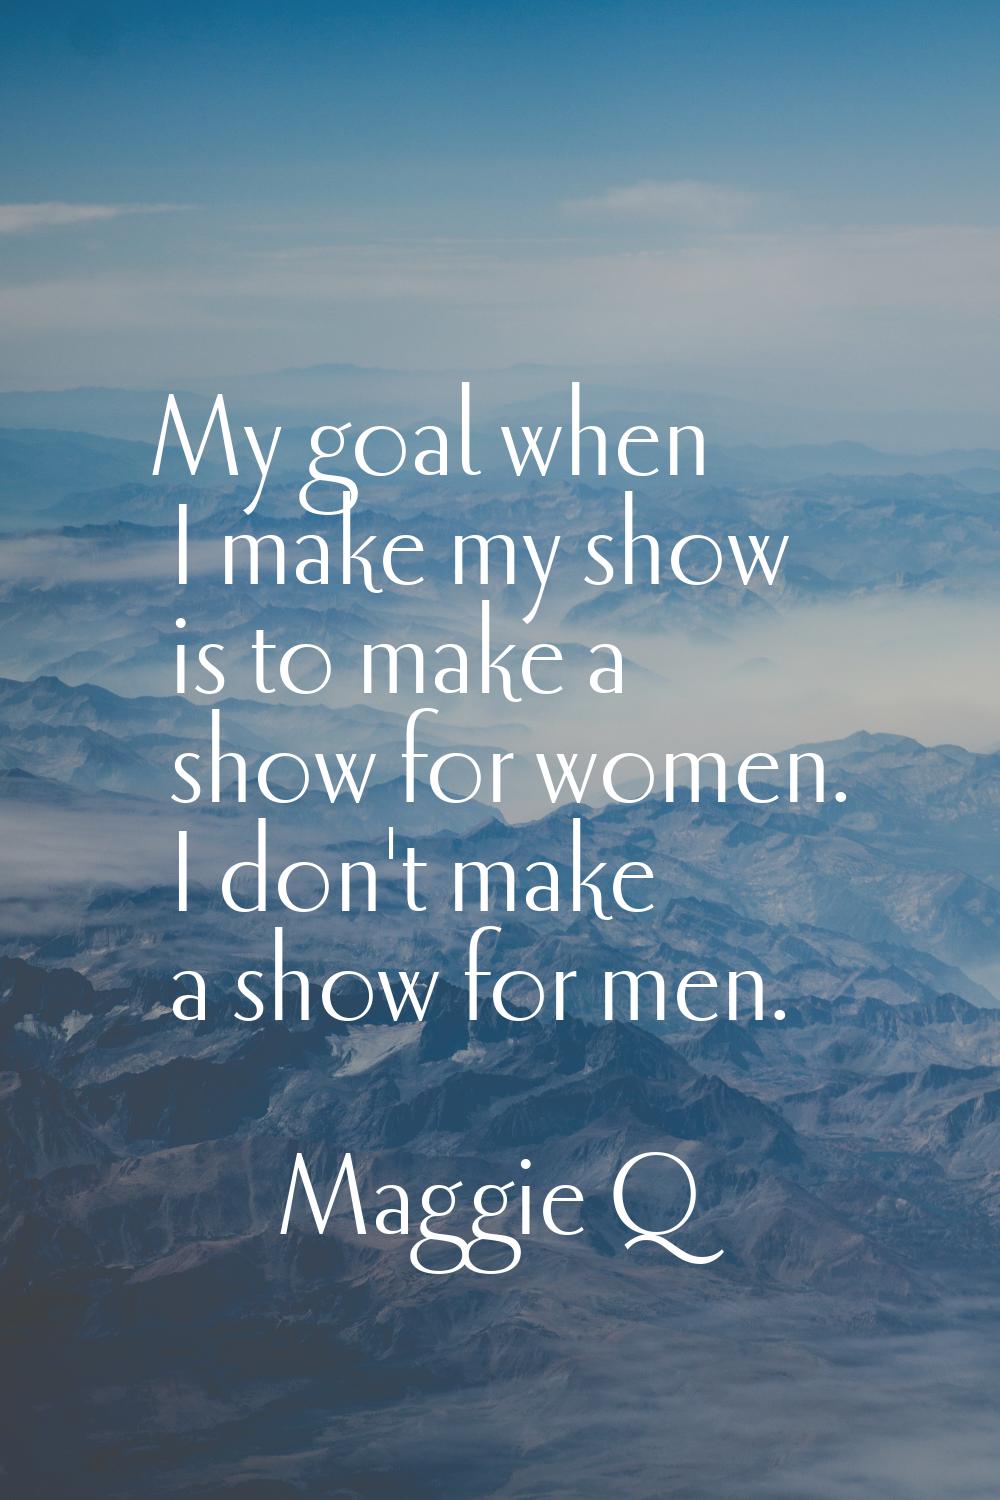 My goal when I make my show is to make a show for women. I don't make a show for men.